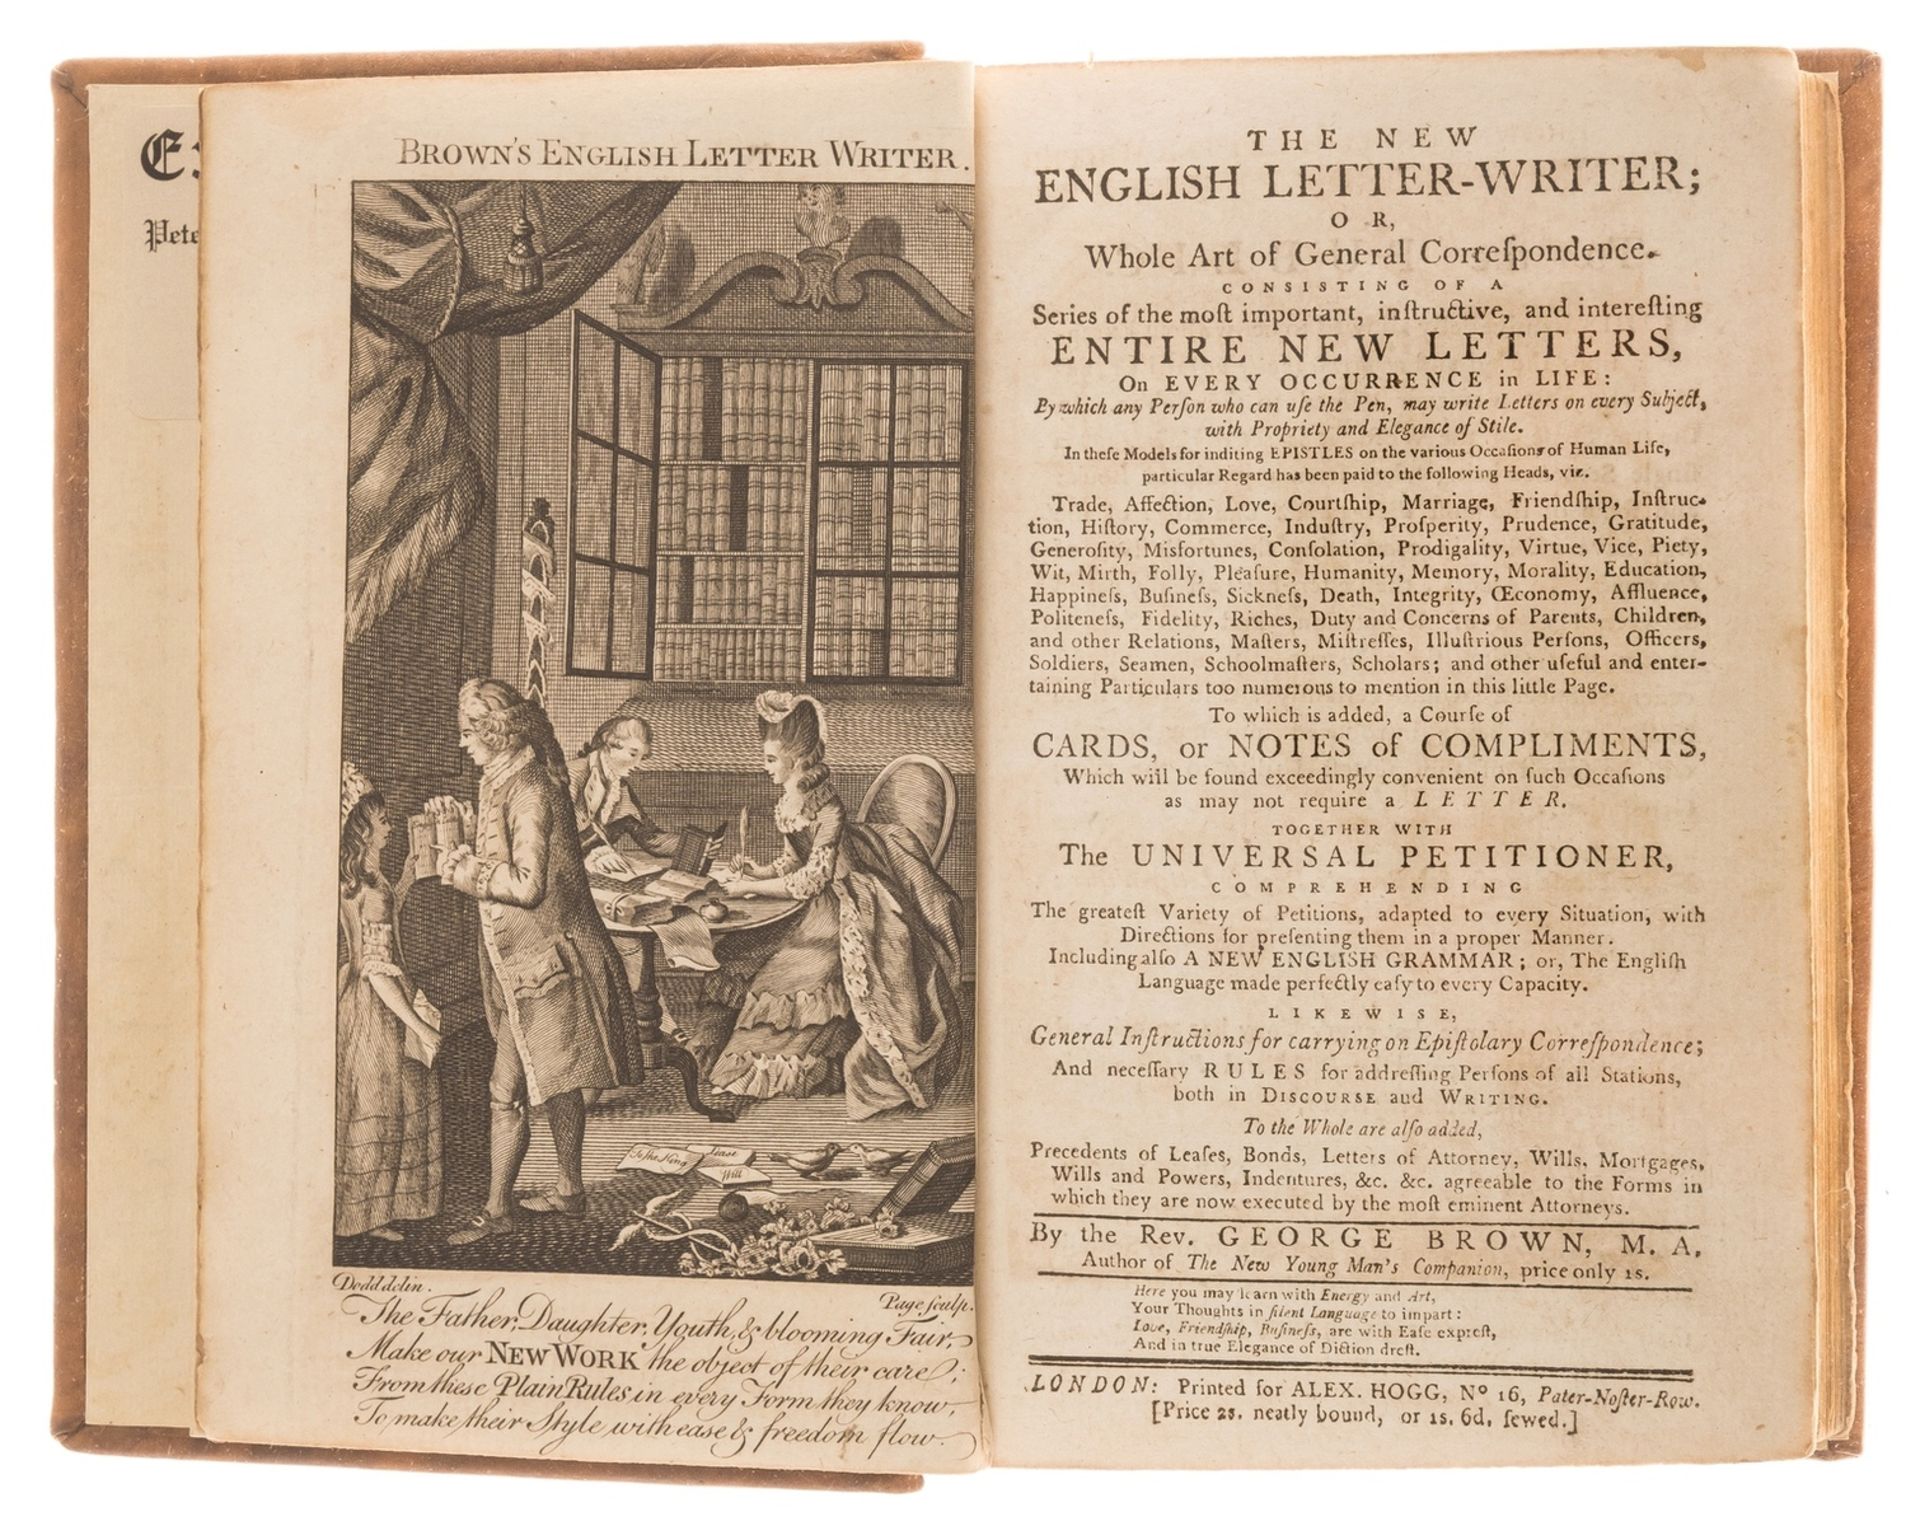 [Brown (Rev. George)] The New English Letter-Writer..., engraved frontispiece, Alex. Hogg, [?1780] …